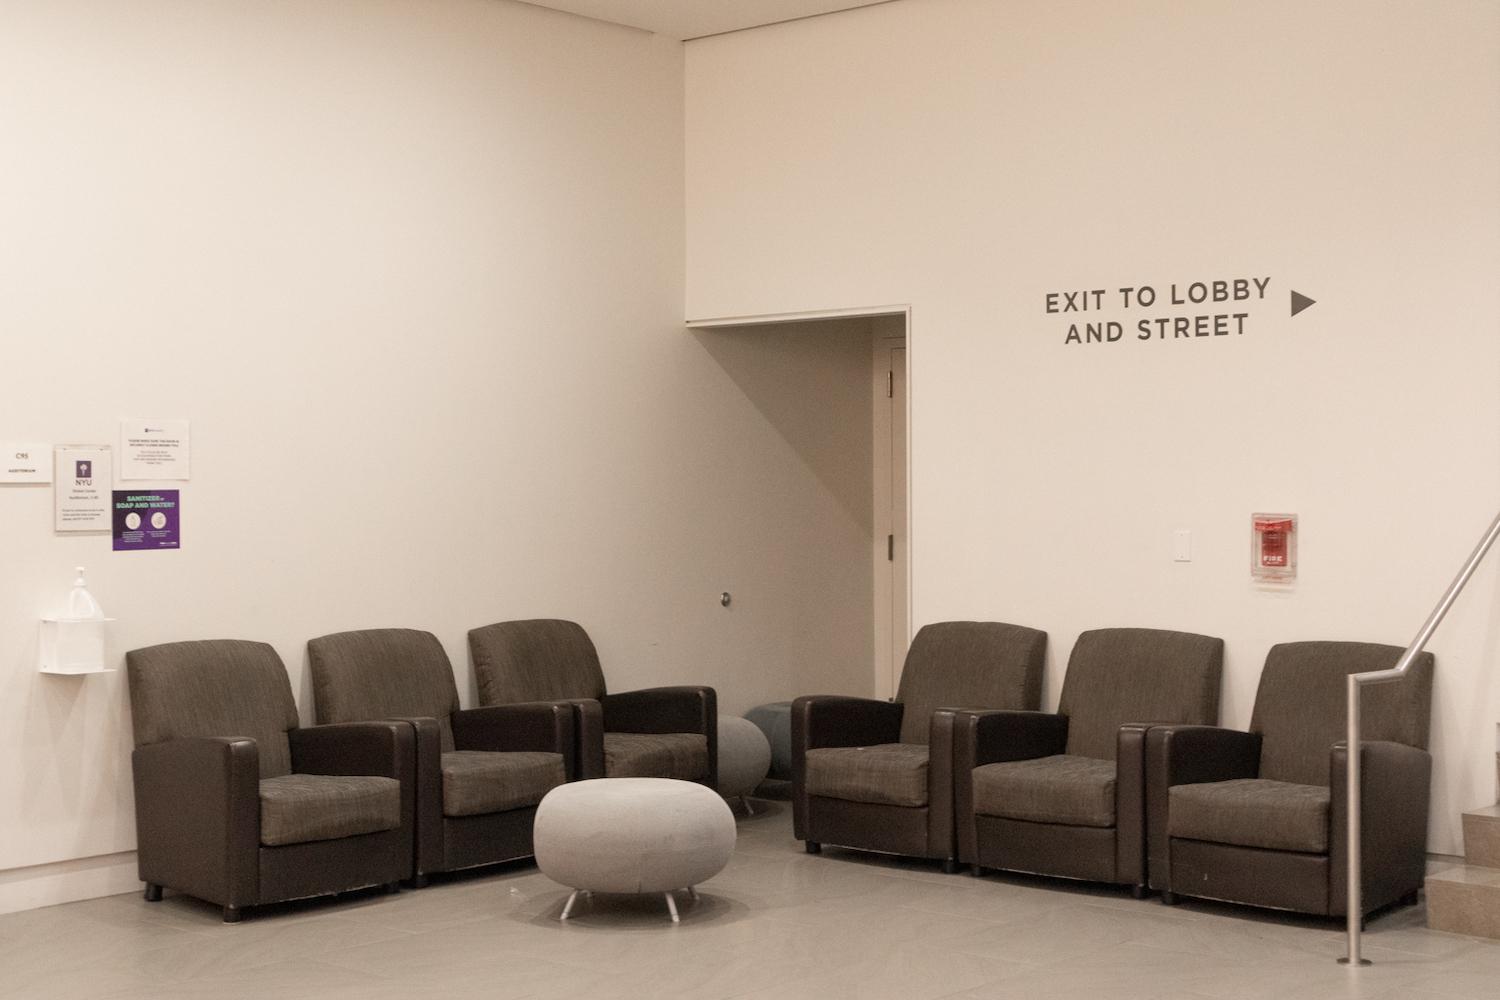 A photo of a vacant corner with six unoccupied gray couches with a sign that reads “Exit To Lobby And Street” on the right wall.